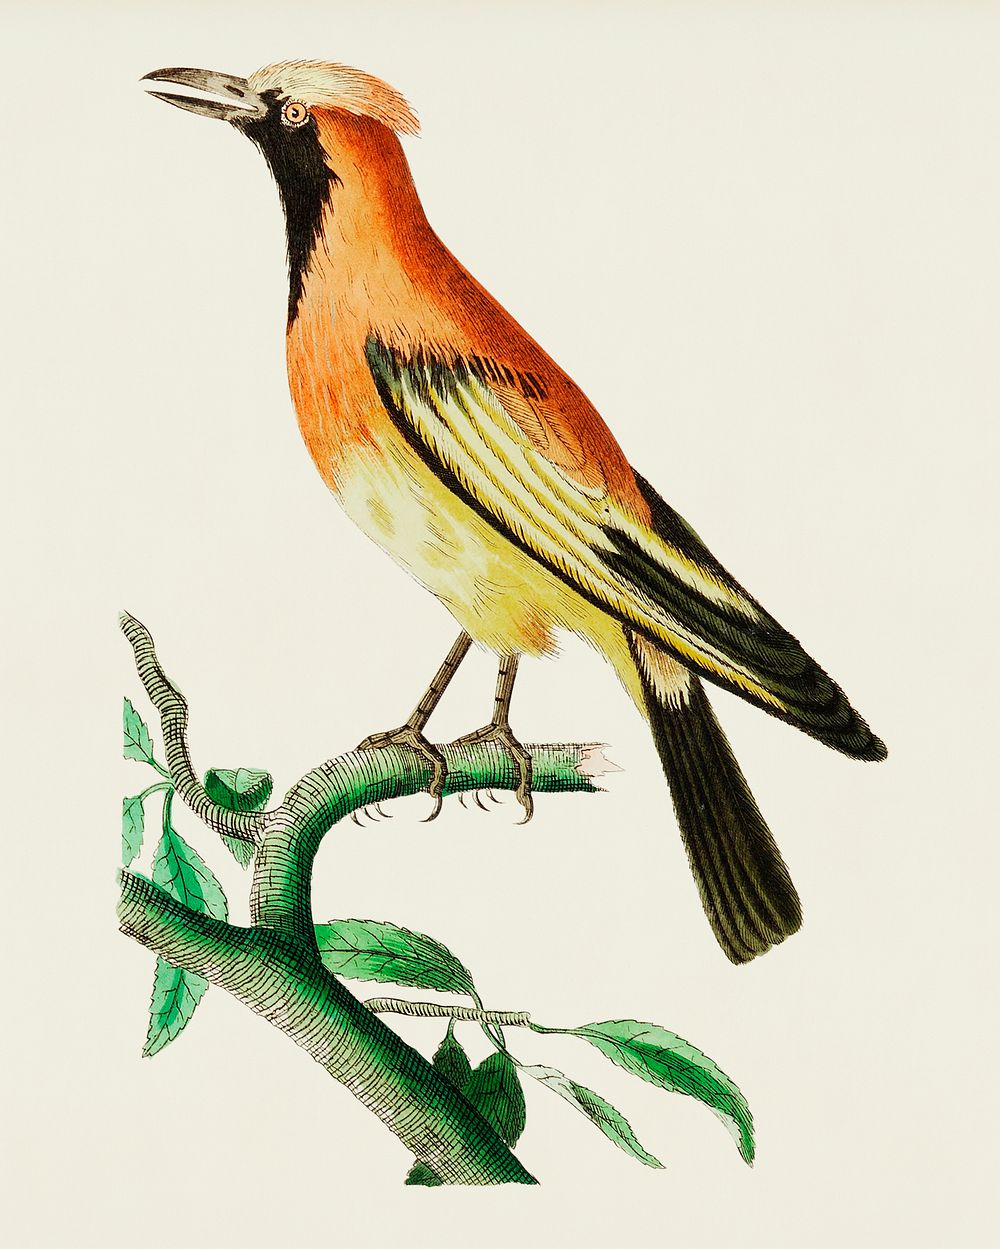 Orange Paradise Bird or Golden Bird of Paradise illustration from The Naturalist's Miscellany (1789-1813) by George Shaw…